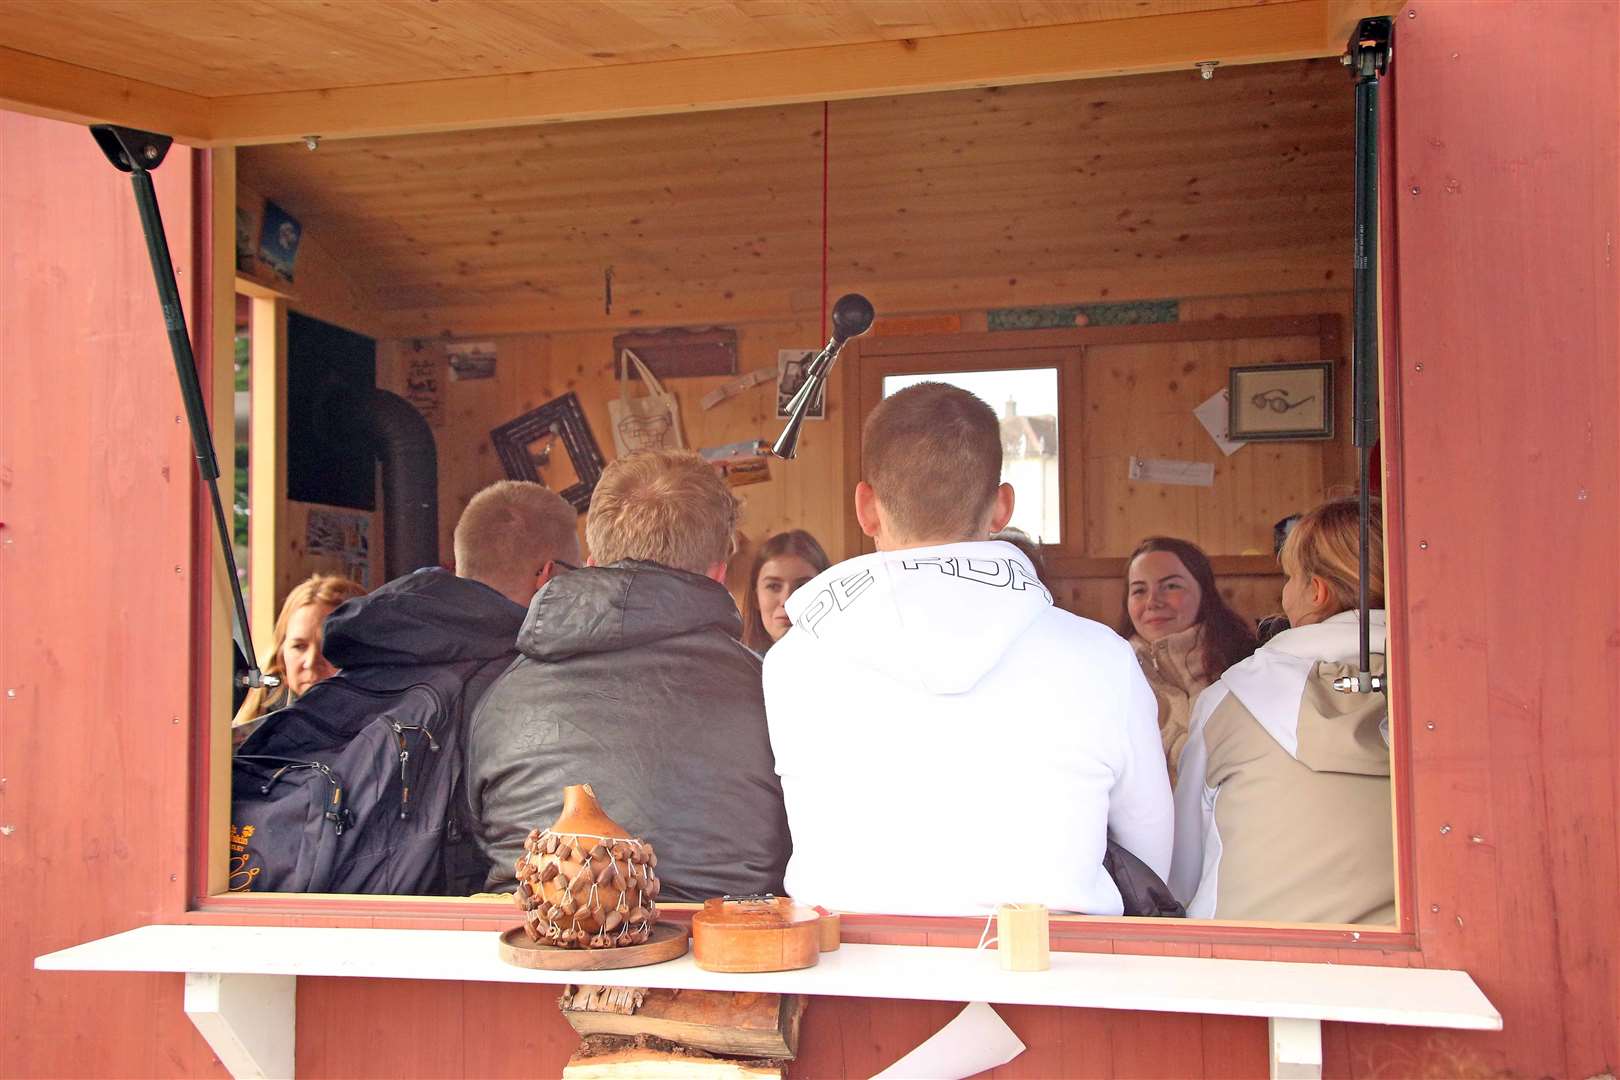 Pupils from Lossiemouth and Hersbruck join together inside the welcome hut.